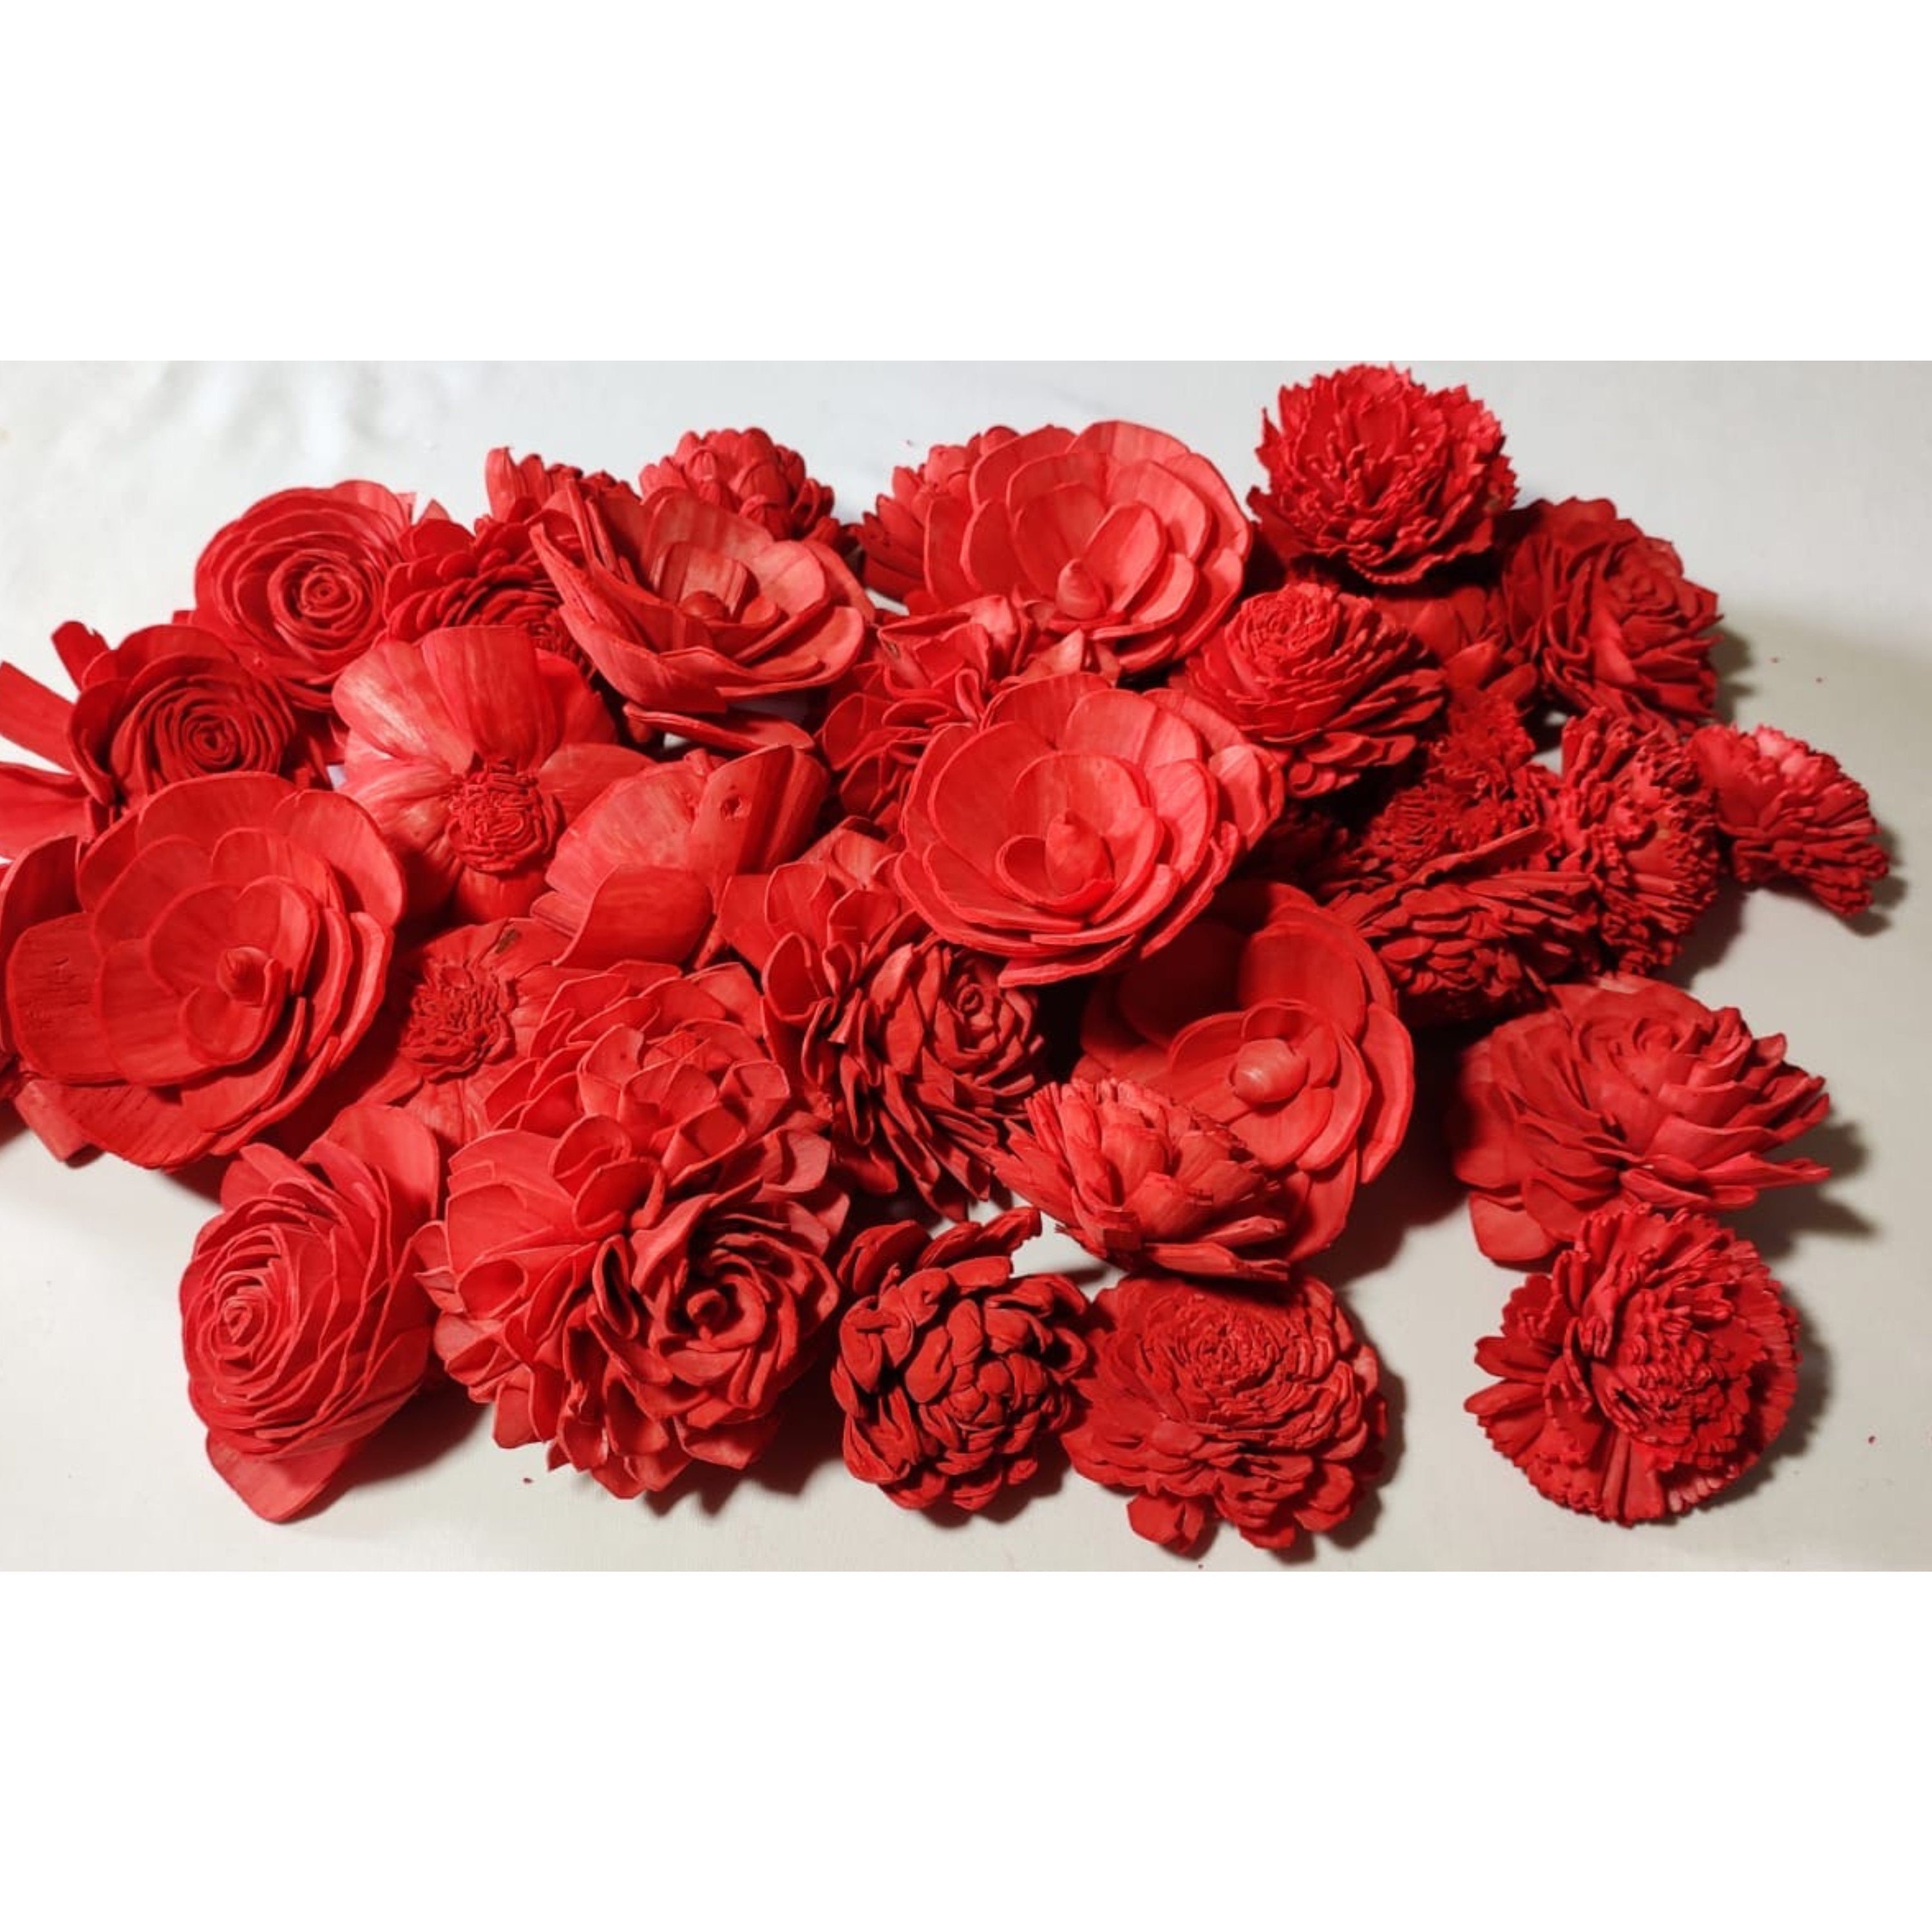 Solawood Flowers Random (No Bark), Artificial Flowers for Decoration (red)